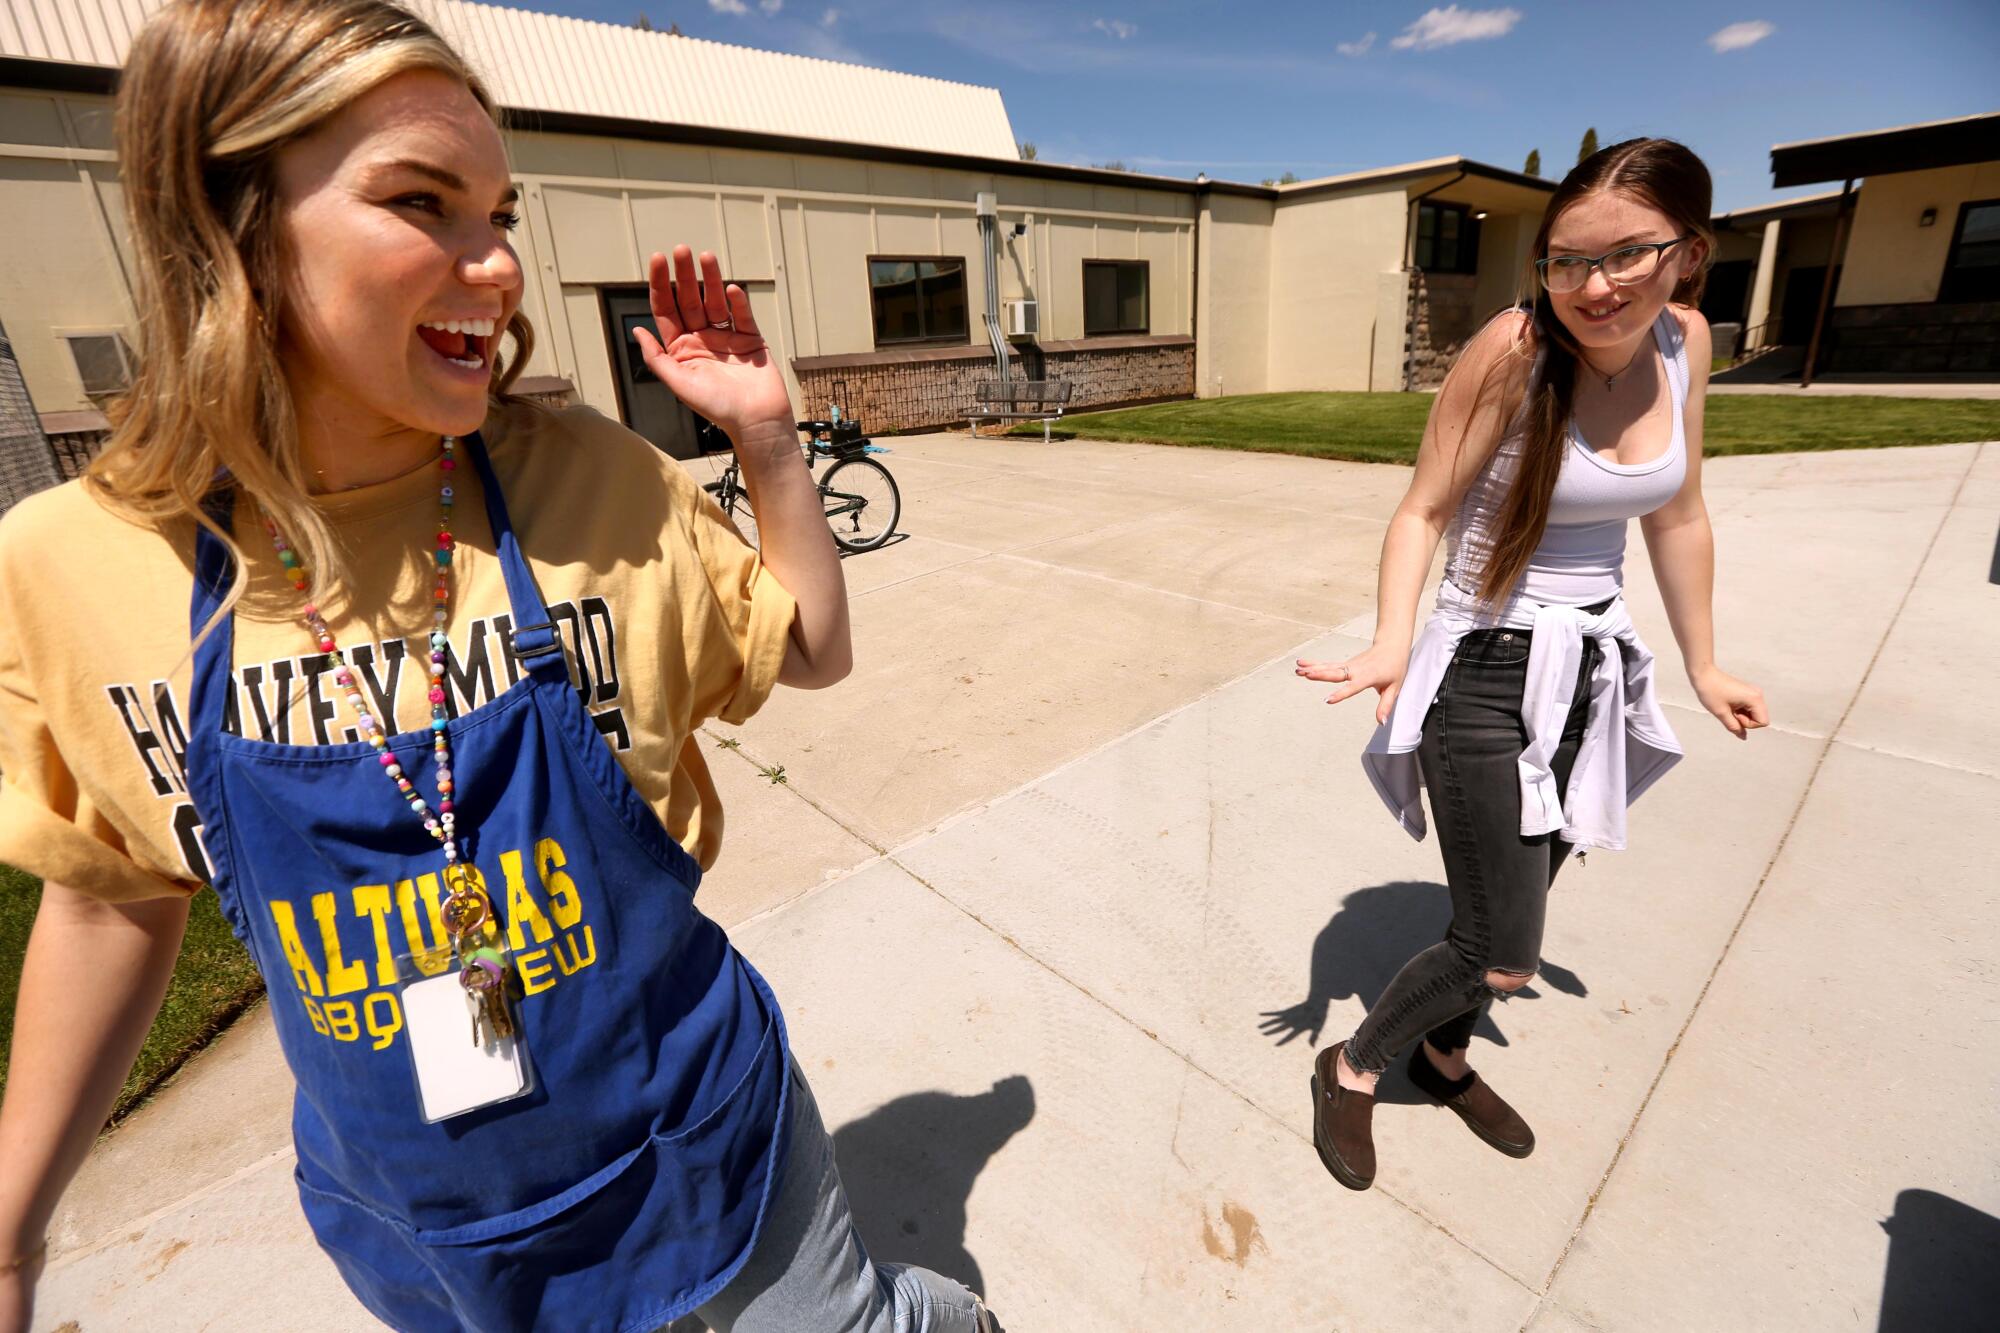 School counselor Candice Boudreaux, left, greets senior Linda Plumlee at Modoc High School in Alturas.